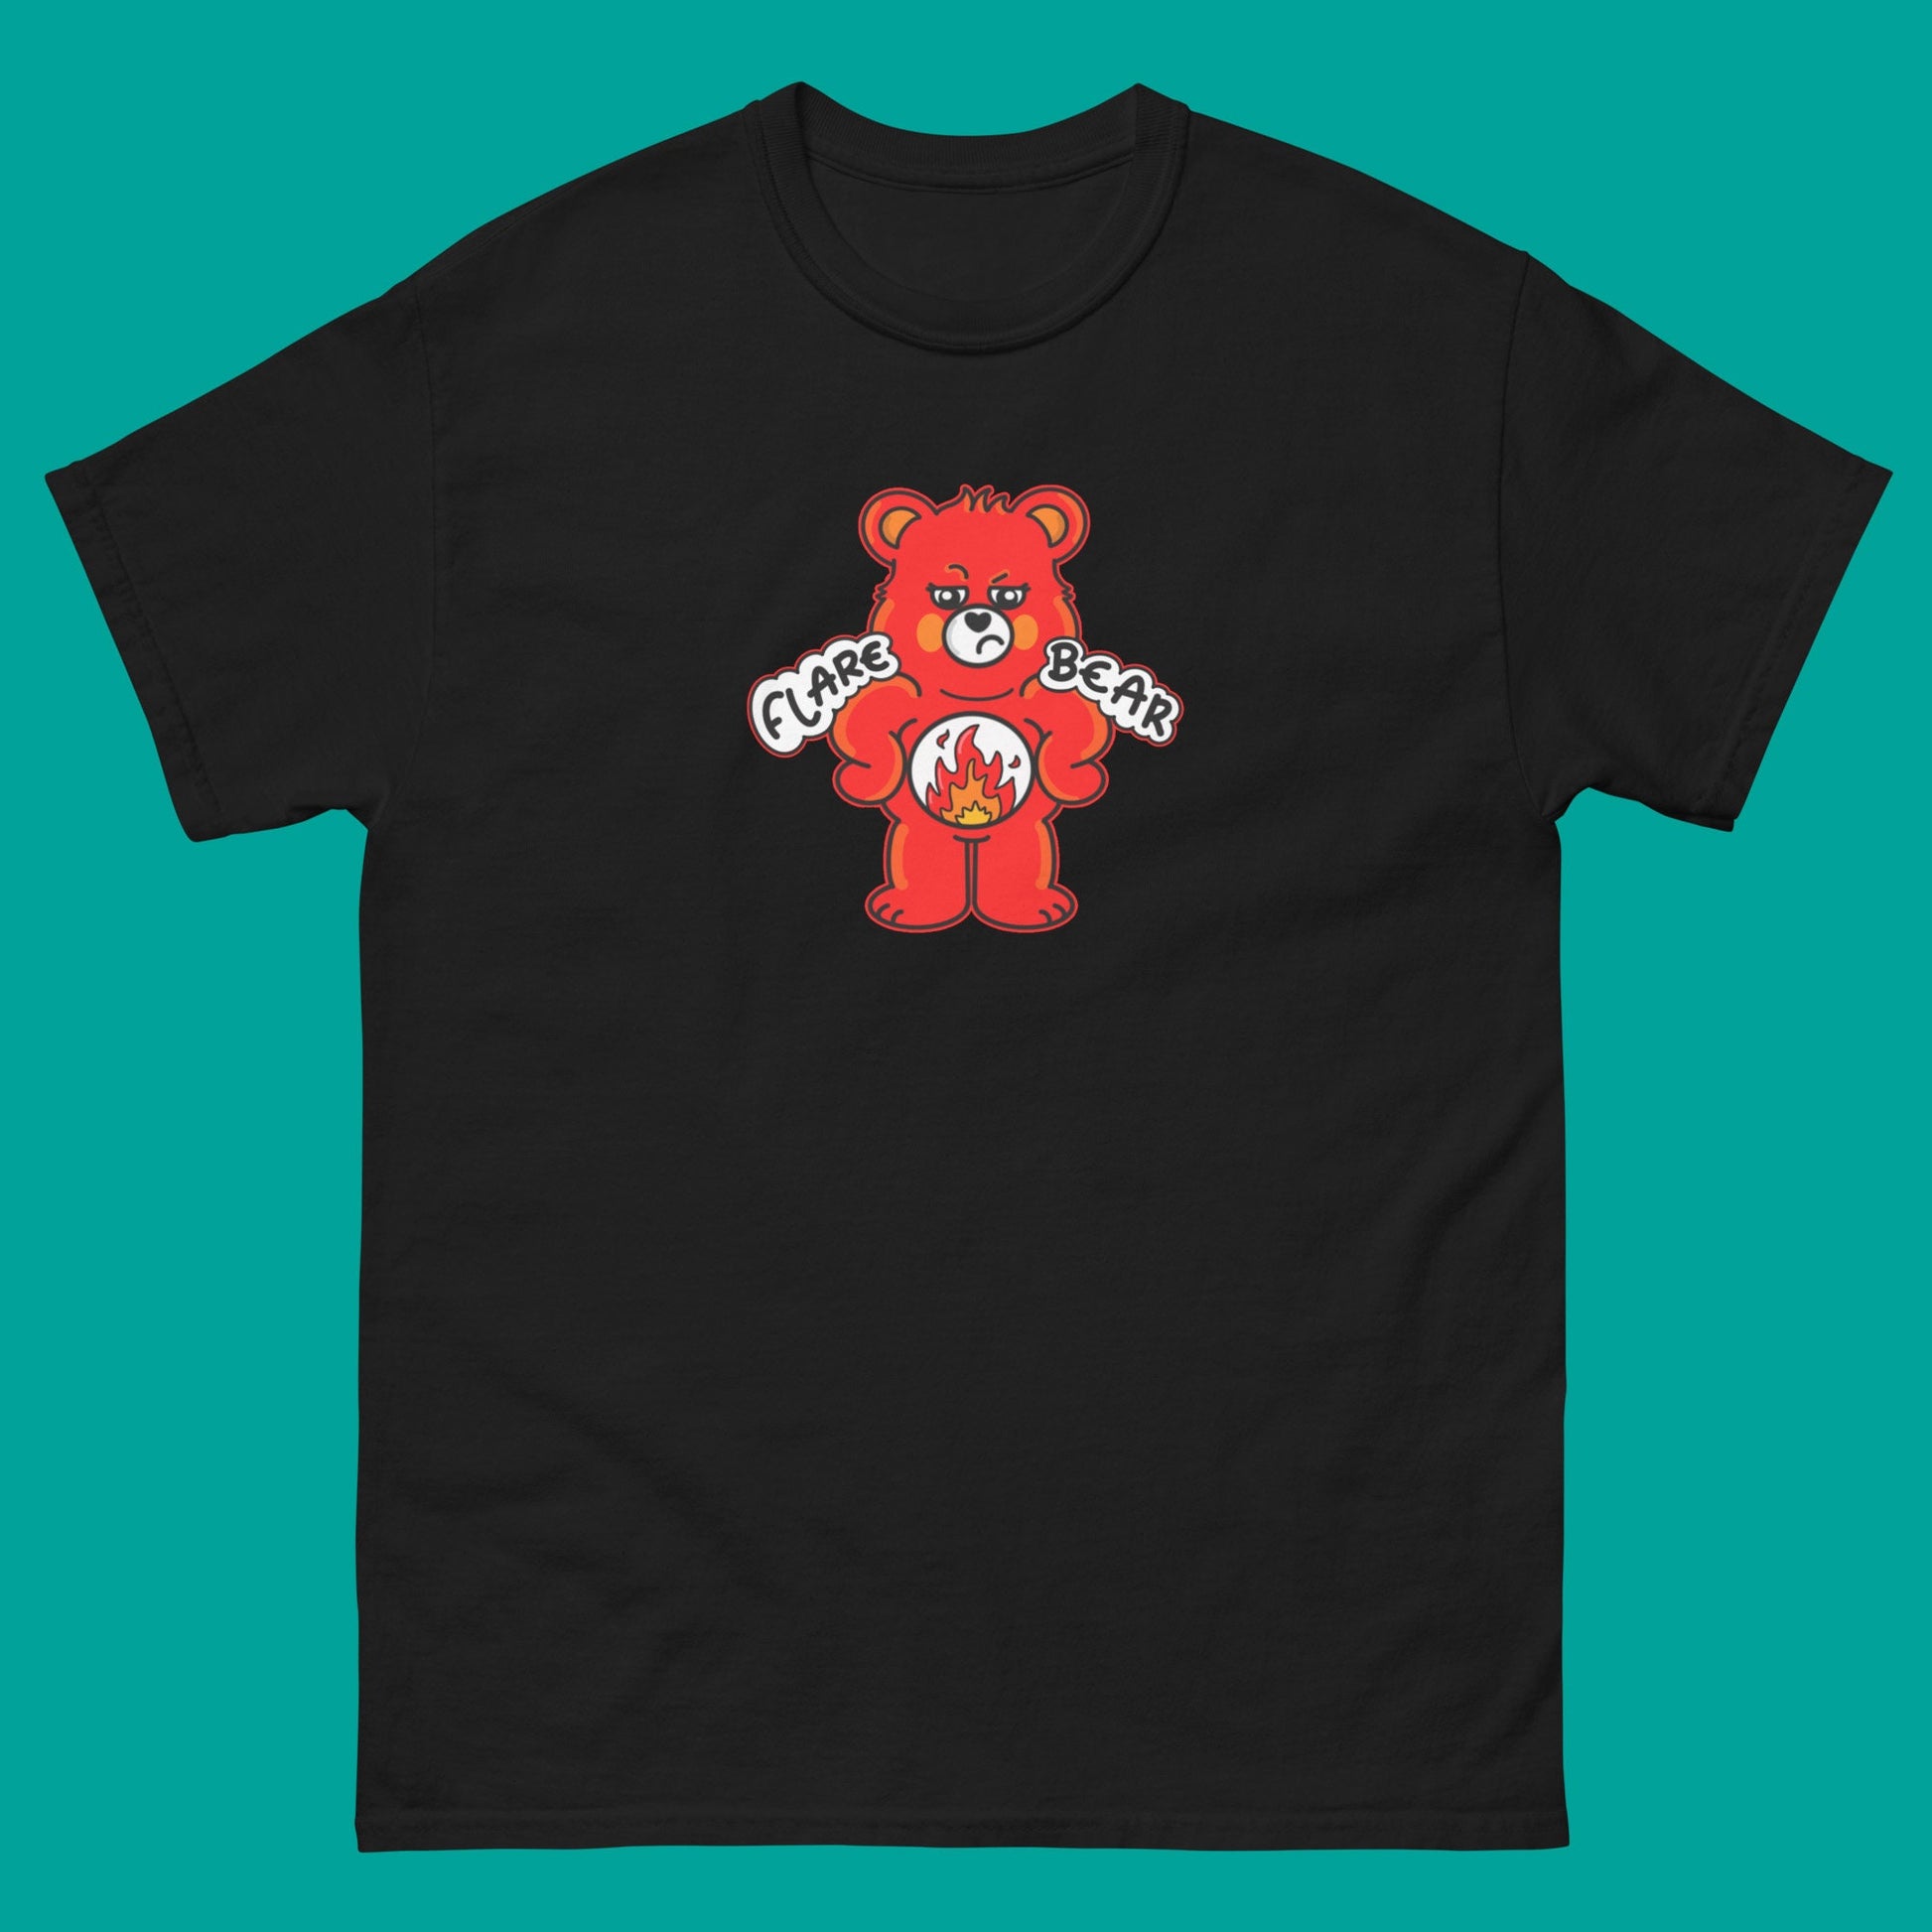 Flare Bear T-shirt on a blue background. The black short sleeve tshirt is of a red bear with a fed up expression and hands on its hips. There is a white circle on its belly with flames inside. Flare Bear is written on the middle. The tshirt is designed to raise awareness for chronic illness flare ups.